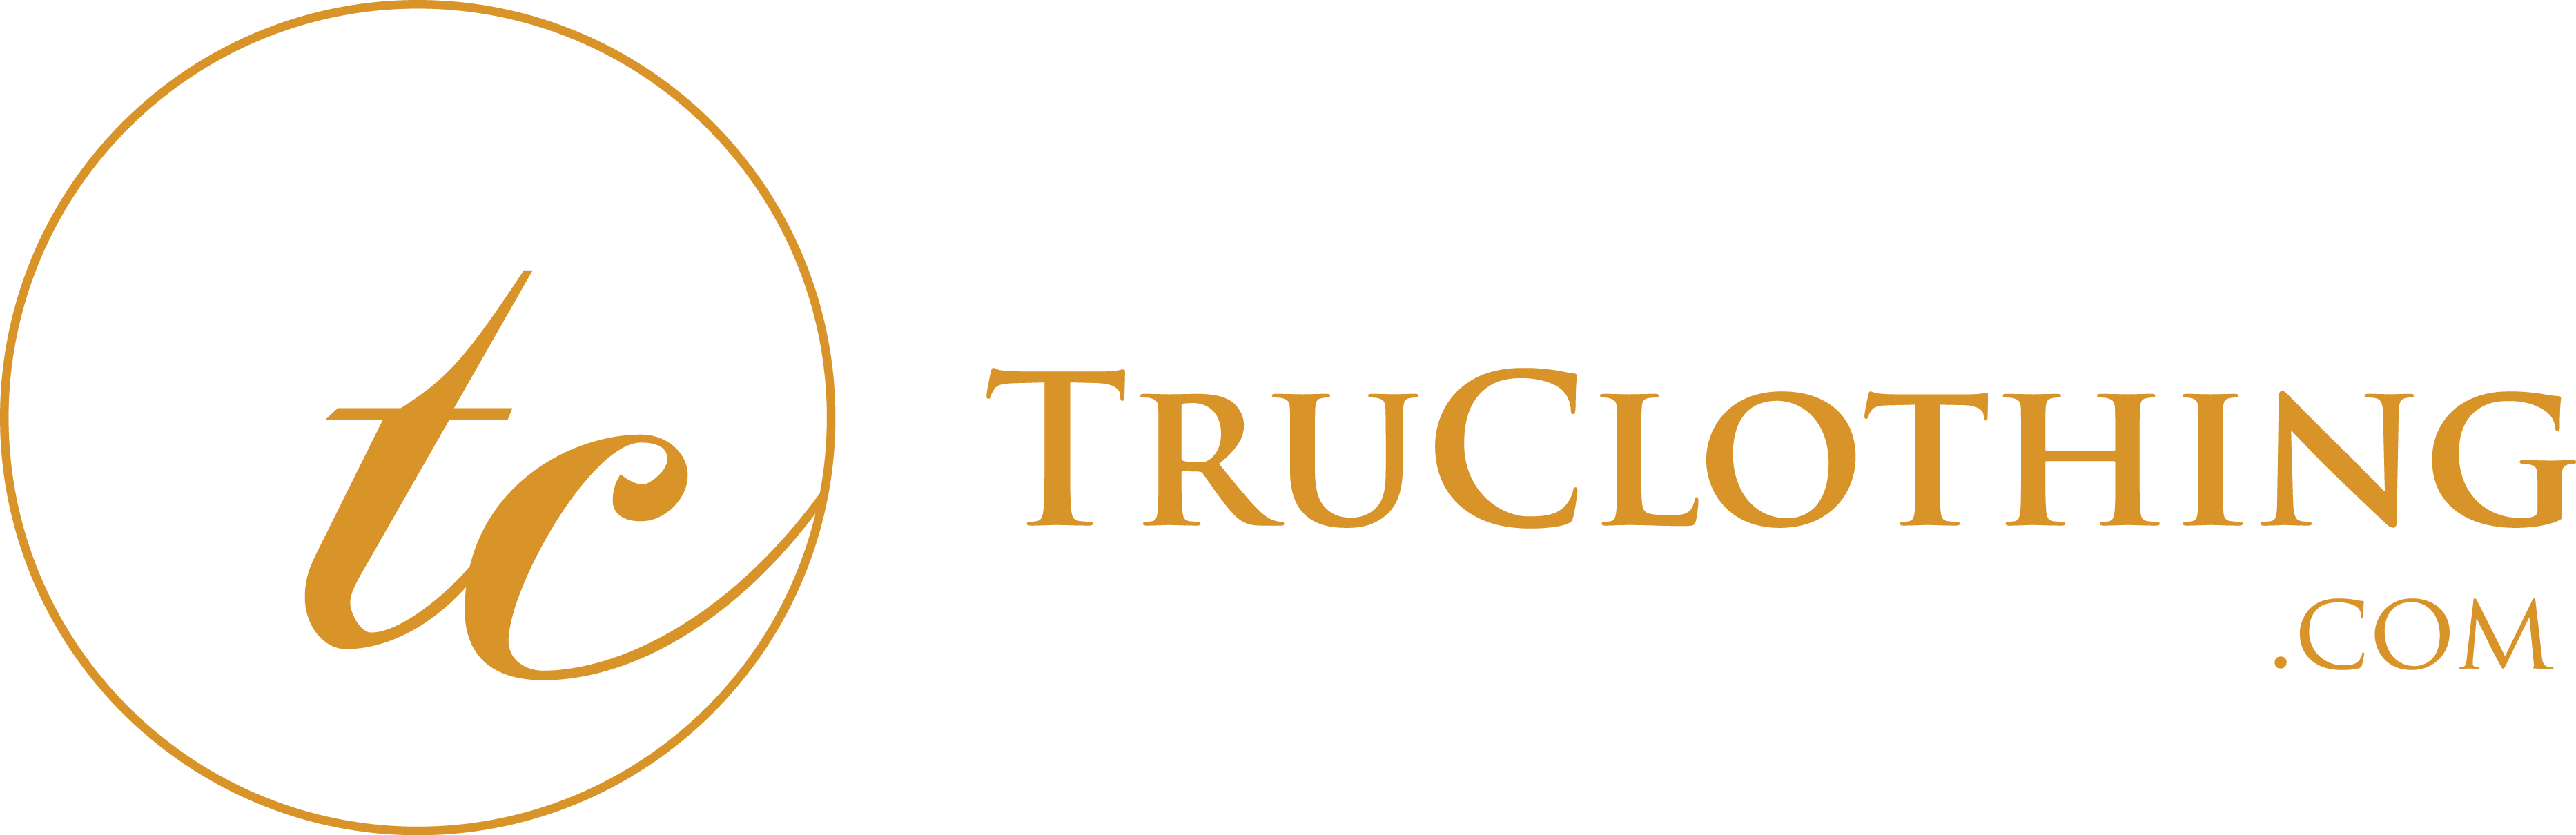 TruClothing Coupons & Promo Codes